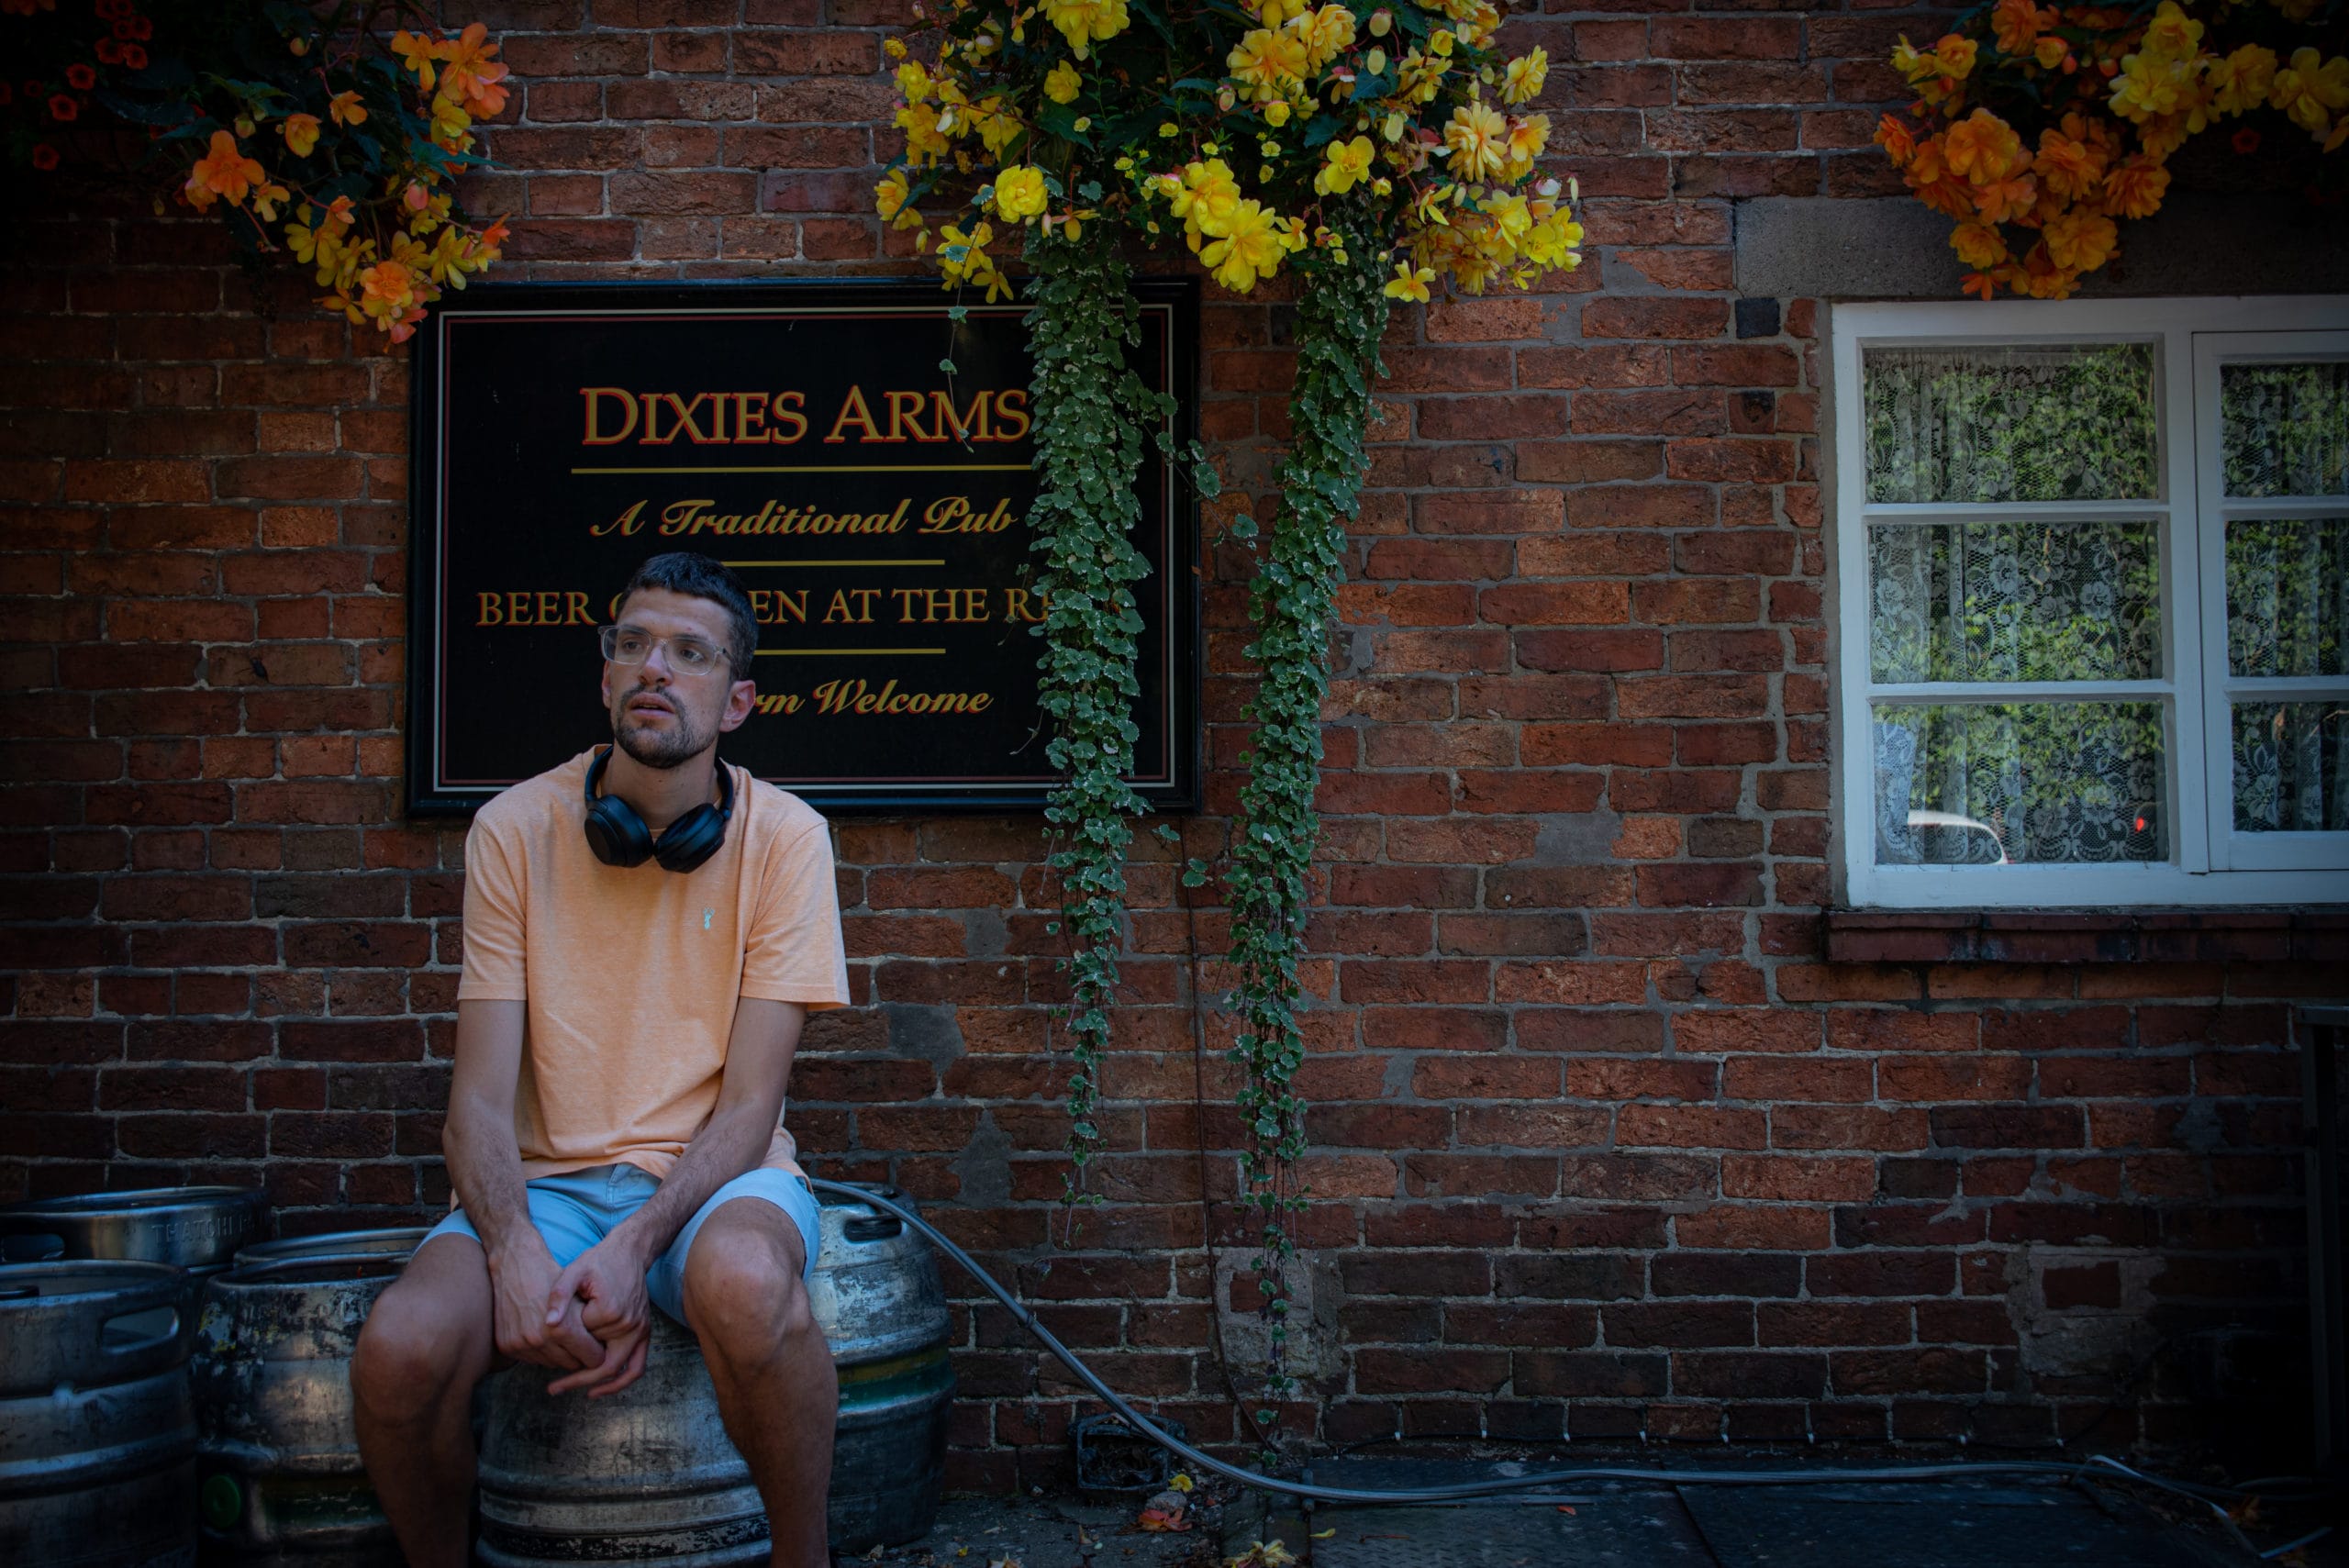 Neal is siting on a beer keg outside a pub called 'Dixies Arms'. He is wearing glasses, a yellow t-shirt, blue shorts and has headphones around his neck. There are hanging baskets full of yellow flowers above his head.